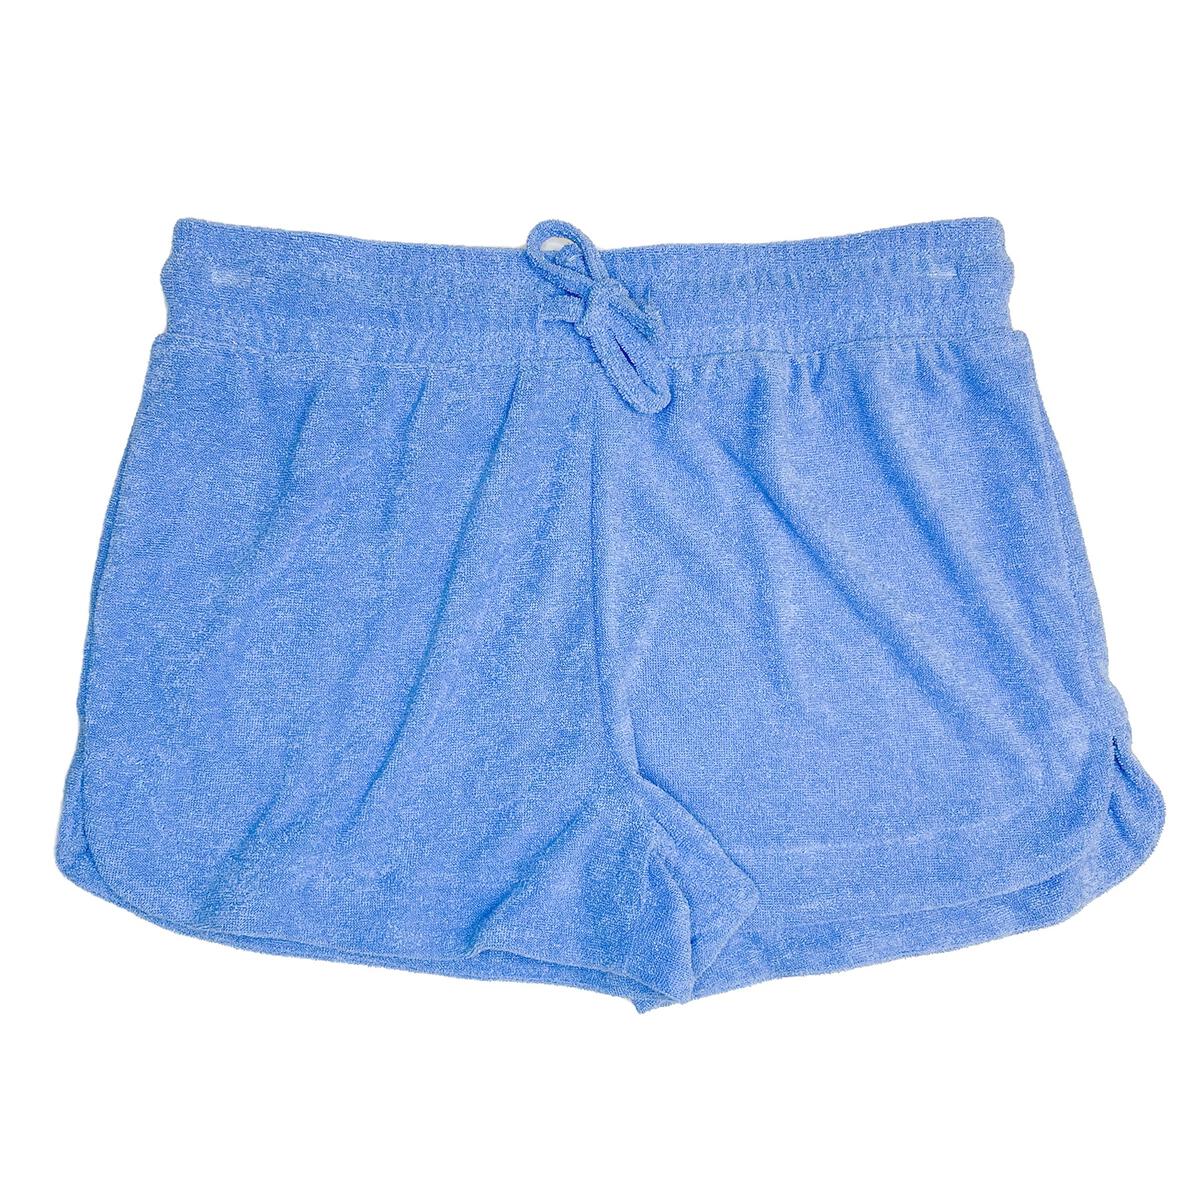 Soft French Terry Short (7-14)